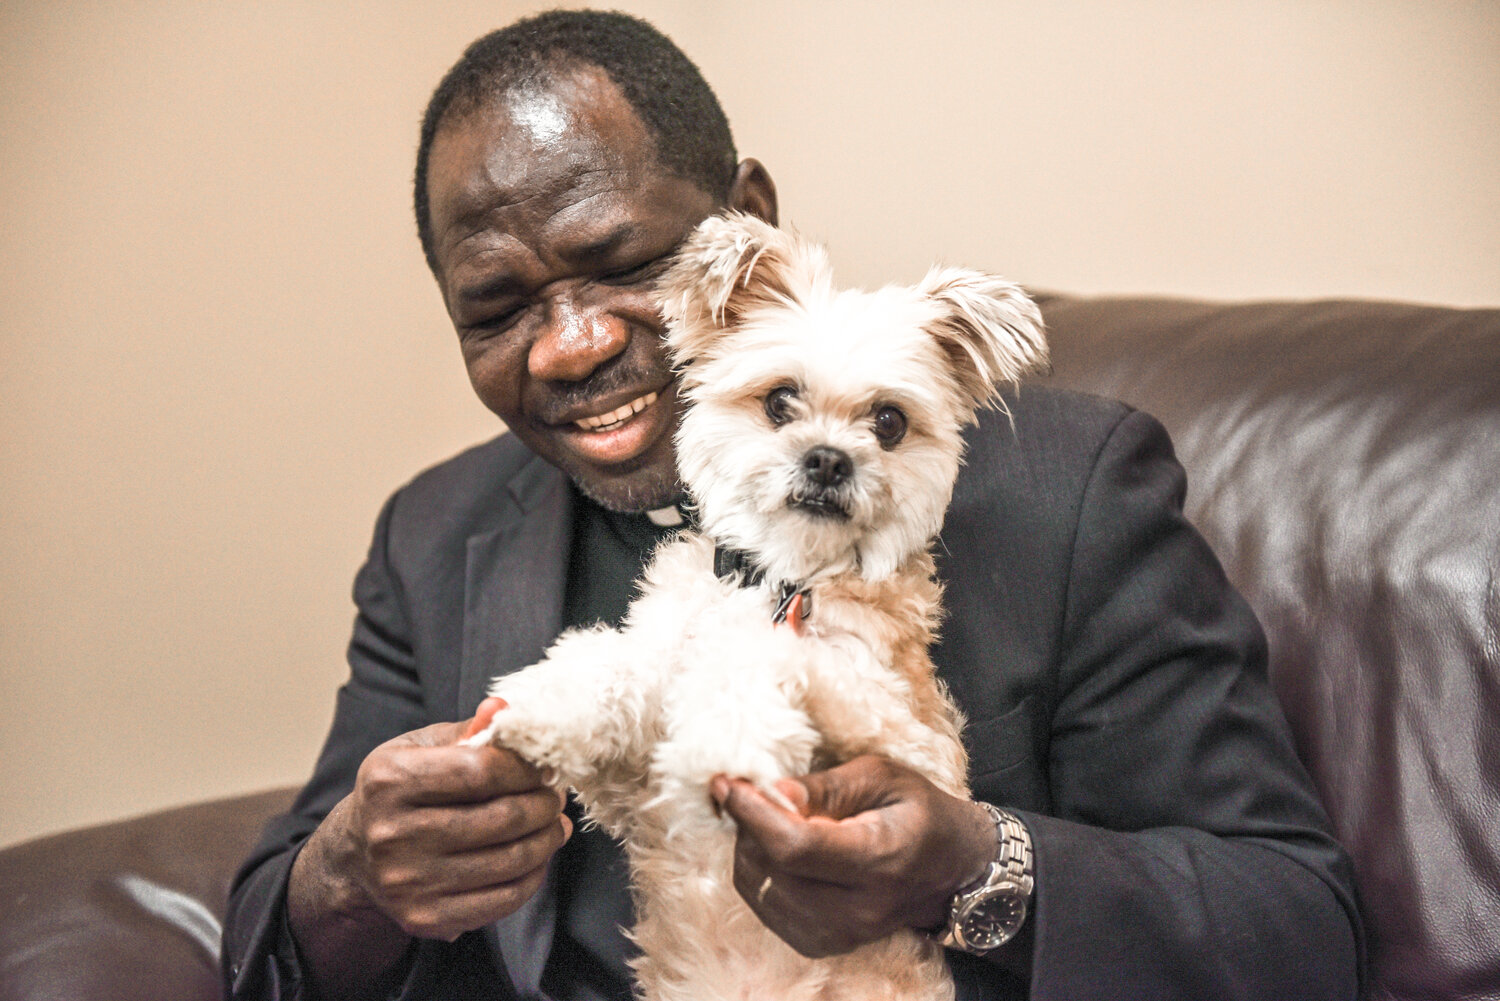 Father Henry Ussher, pastor of St. Clement Parish in St. Clement, St. Joseph Parish in Louisiana and the Mission of Queen of Peace in Clarksville, introduces a visitor to his dog, Africa, a Shih Tzu mix.